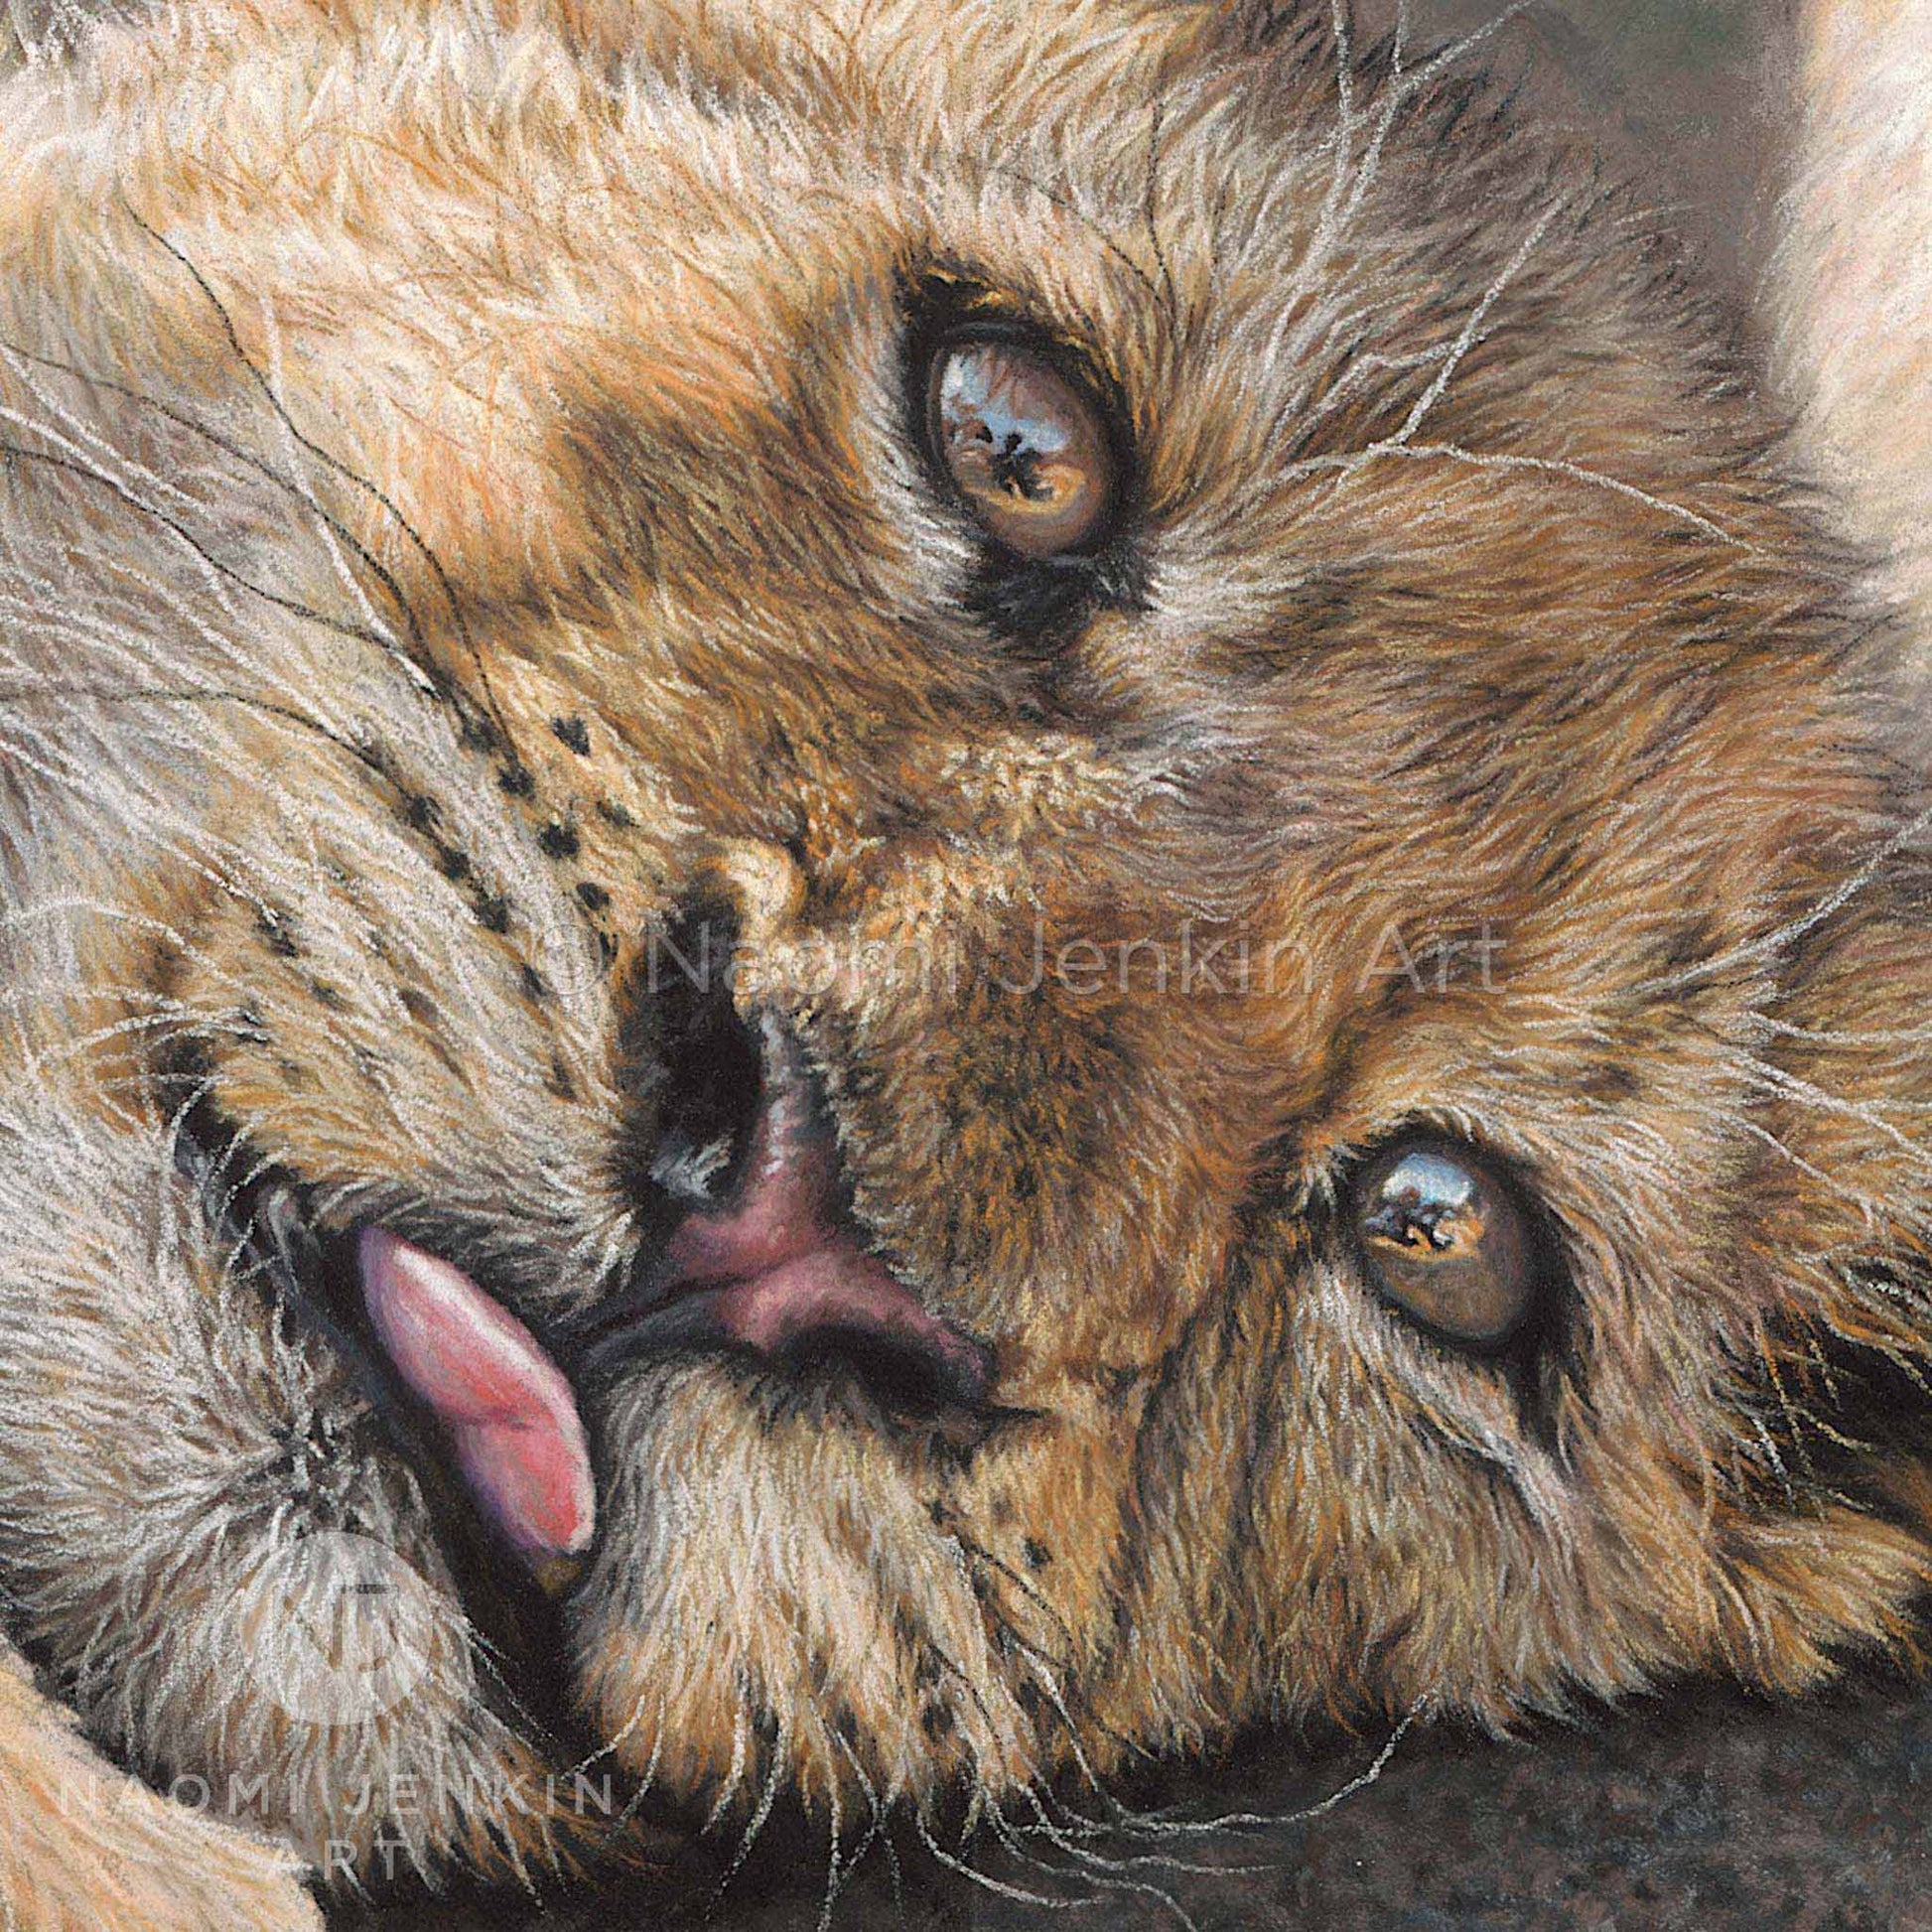 Close up painting of a lion cub's face from the artwork 'Two Brothers' by Naomi Jenkin 